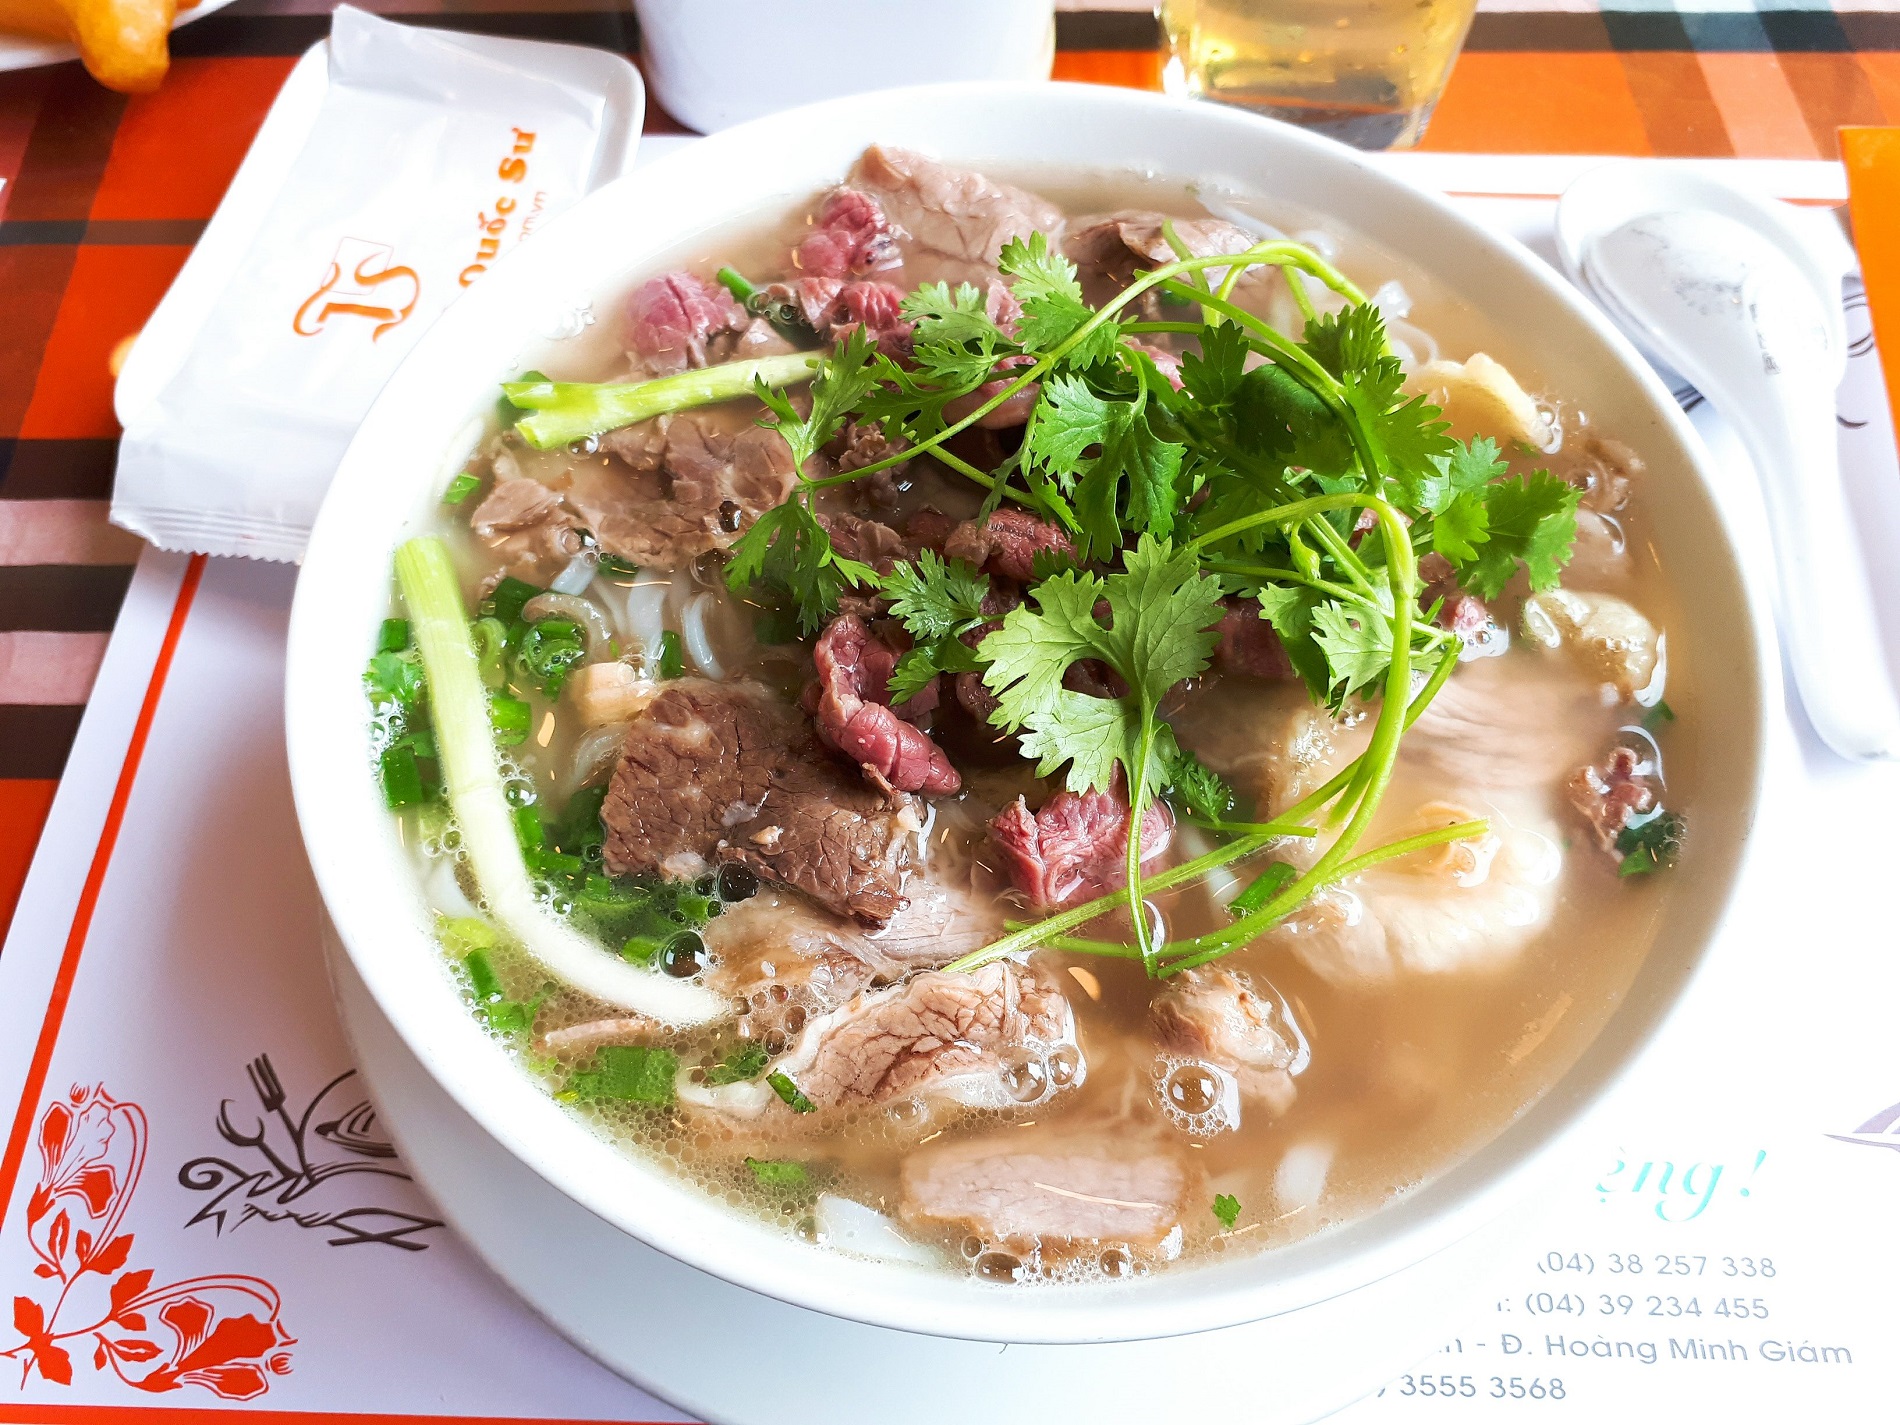 Pho Bo Hanoi - Have you ever tried this tasty dish?